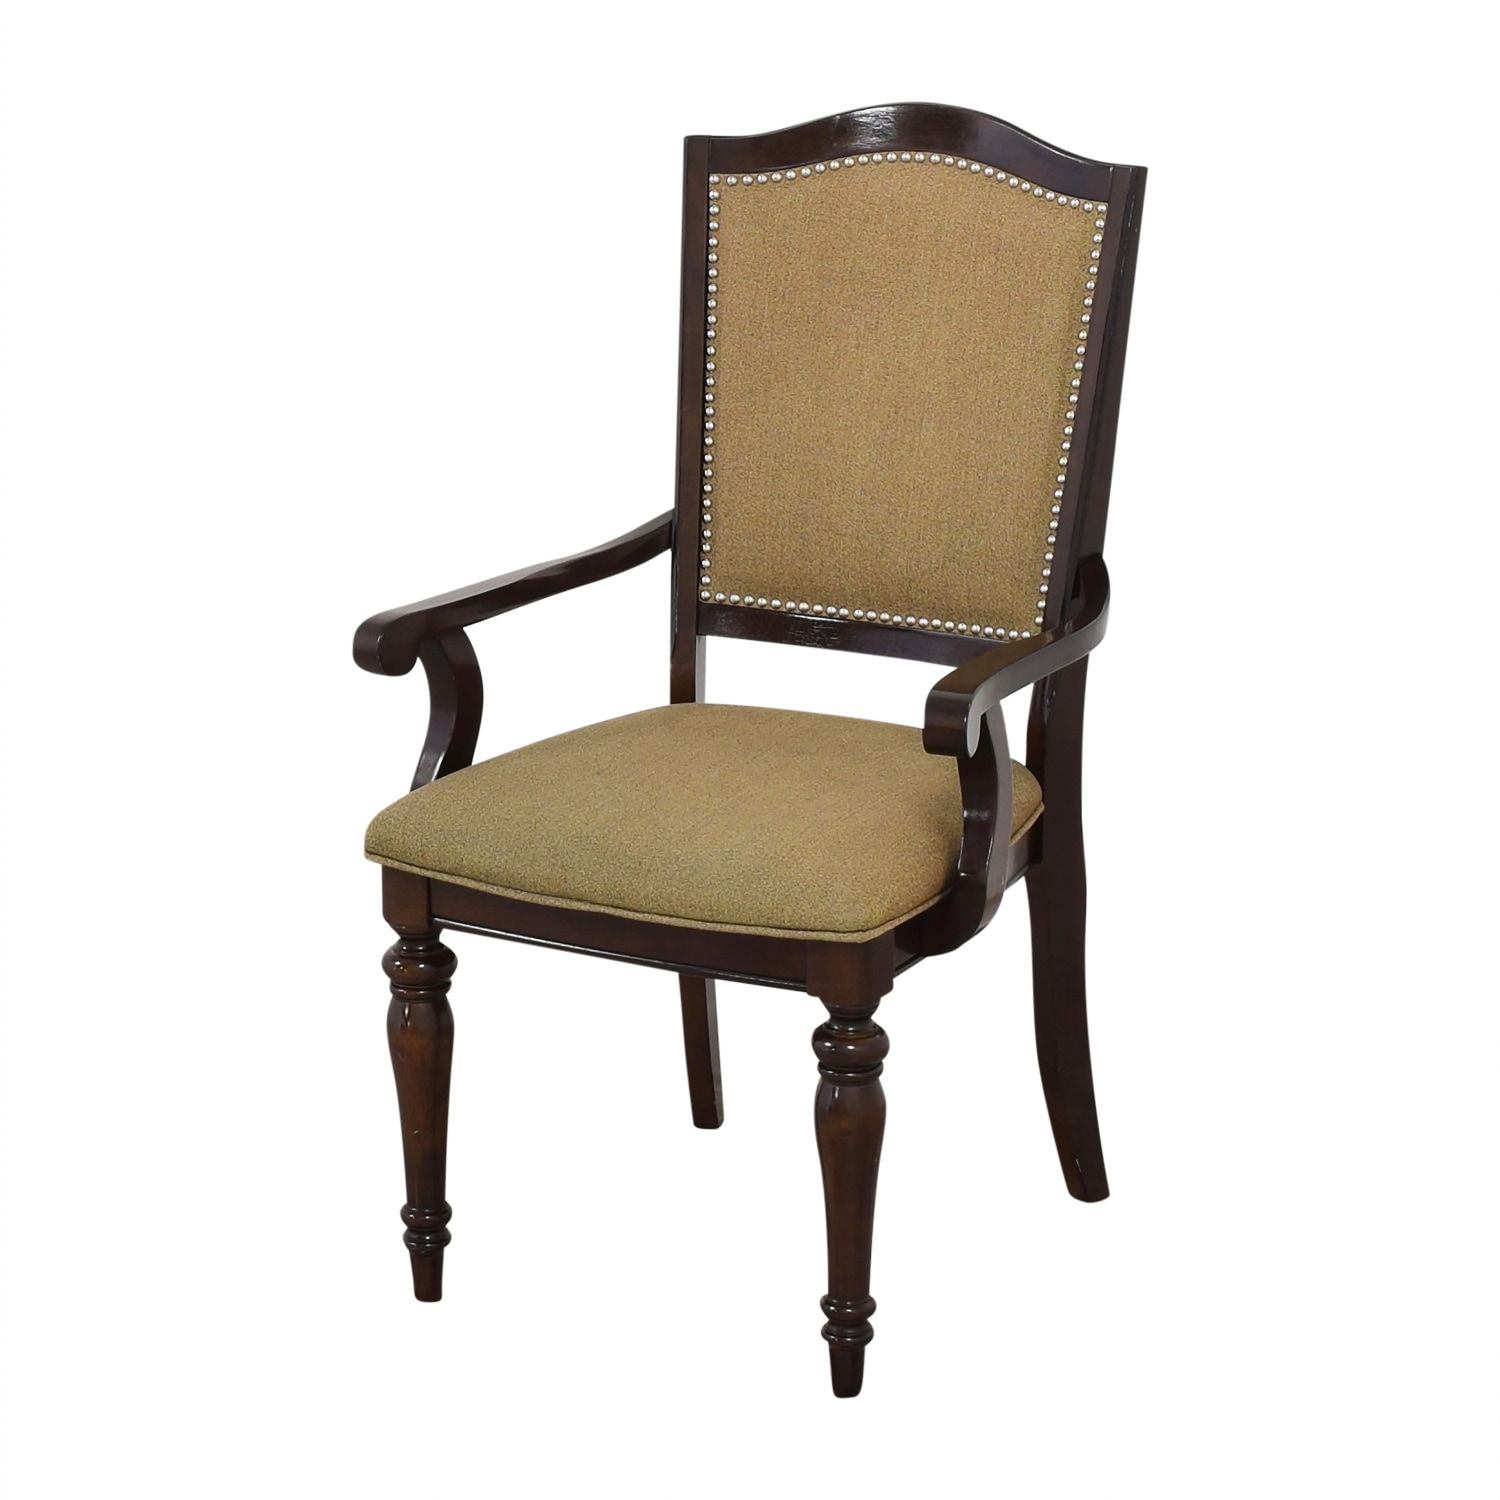 buy Raymour & Flanigan Raymour & Flanigan Bay City Studded Dining Chairs online